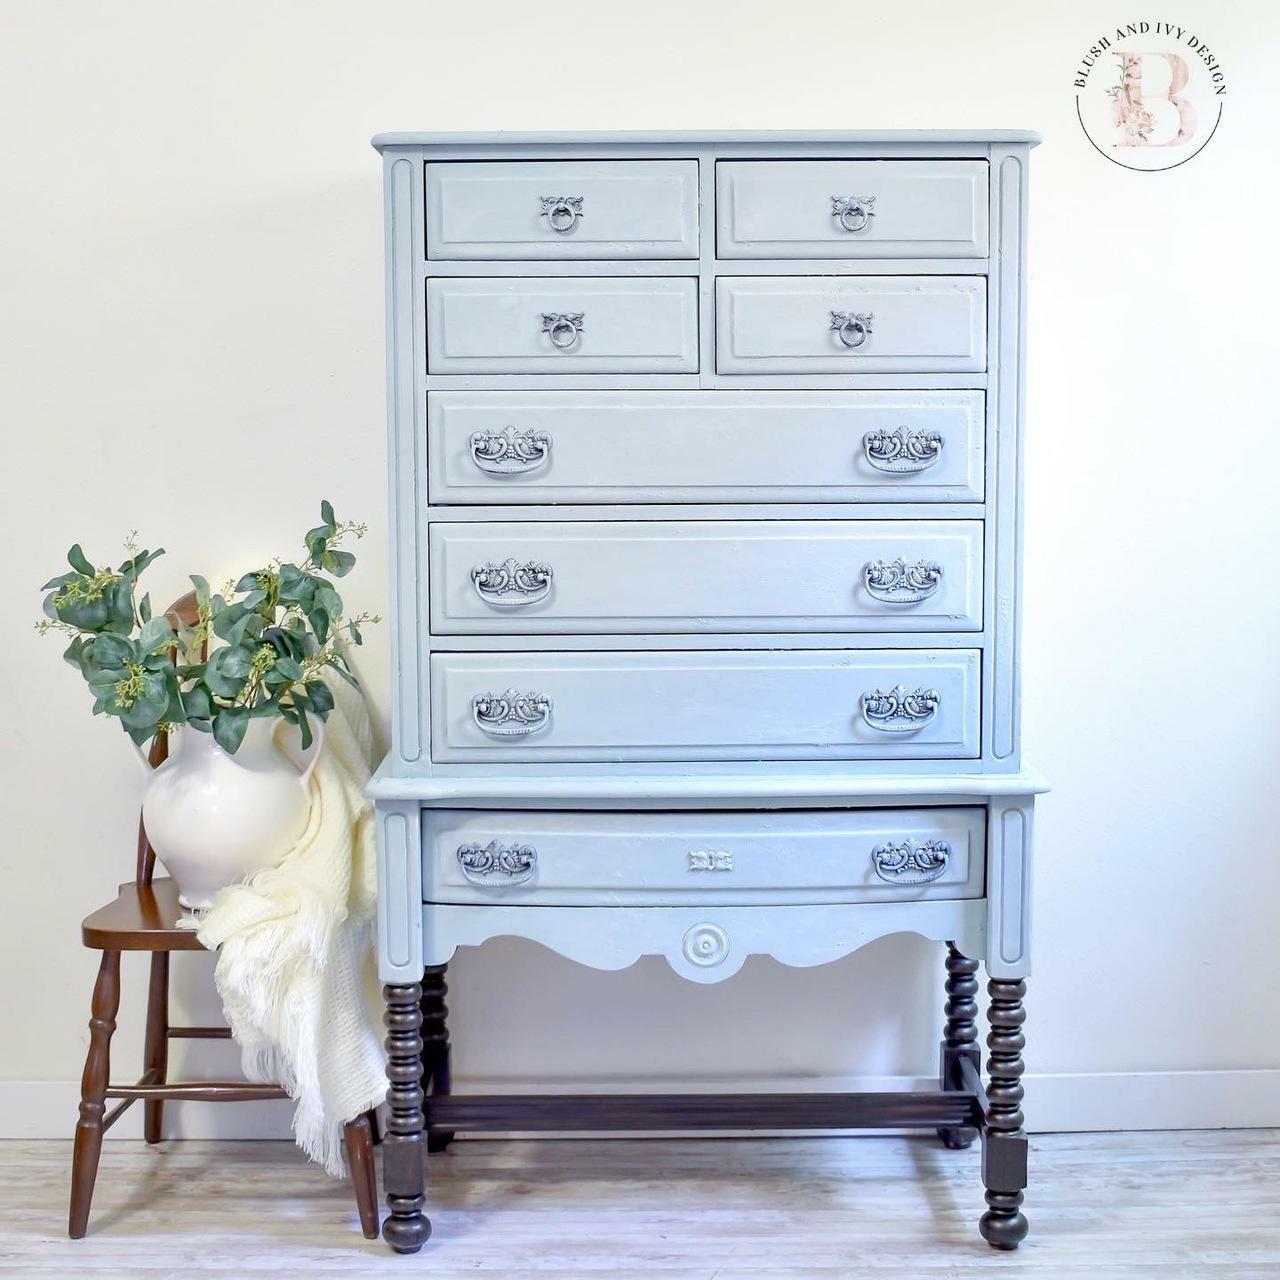 Savannah Mist Dixie Belle Chalk Mineral Paint - Same Day Shipping - No VOC - Chalk Paint for Furniture and Cabinets - Water Based Paint - belleandbeau850